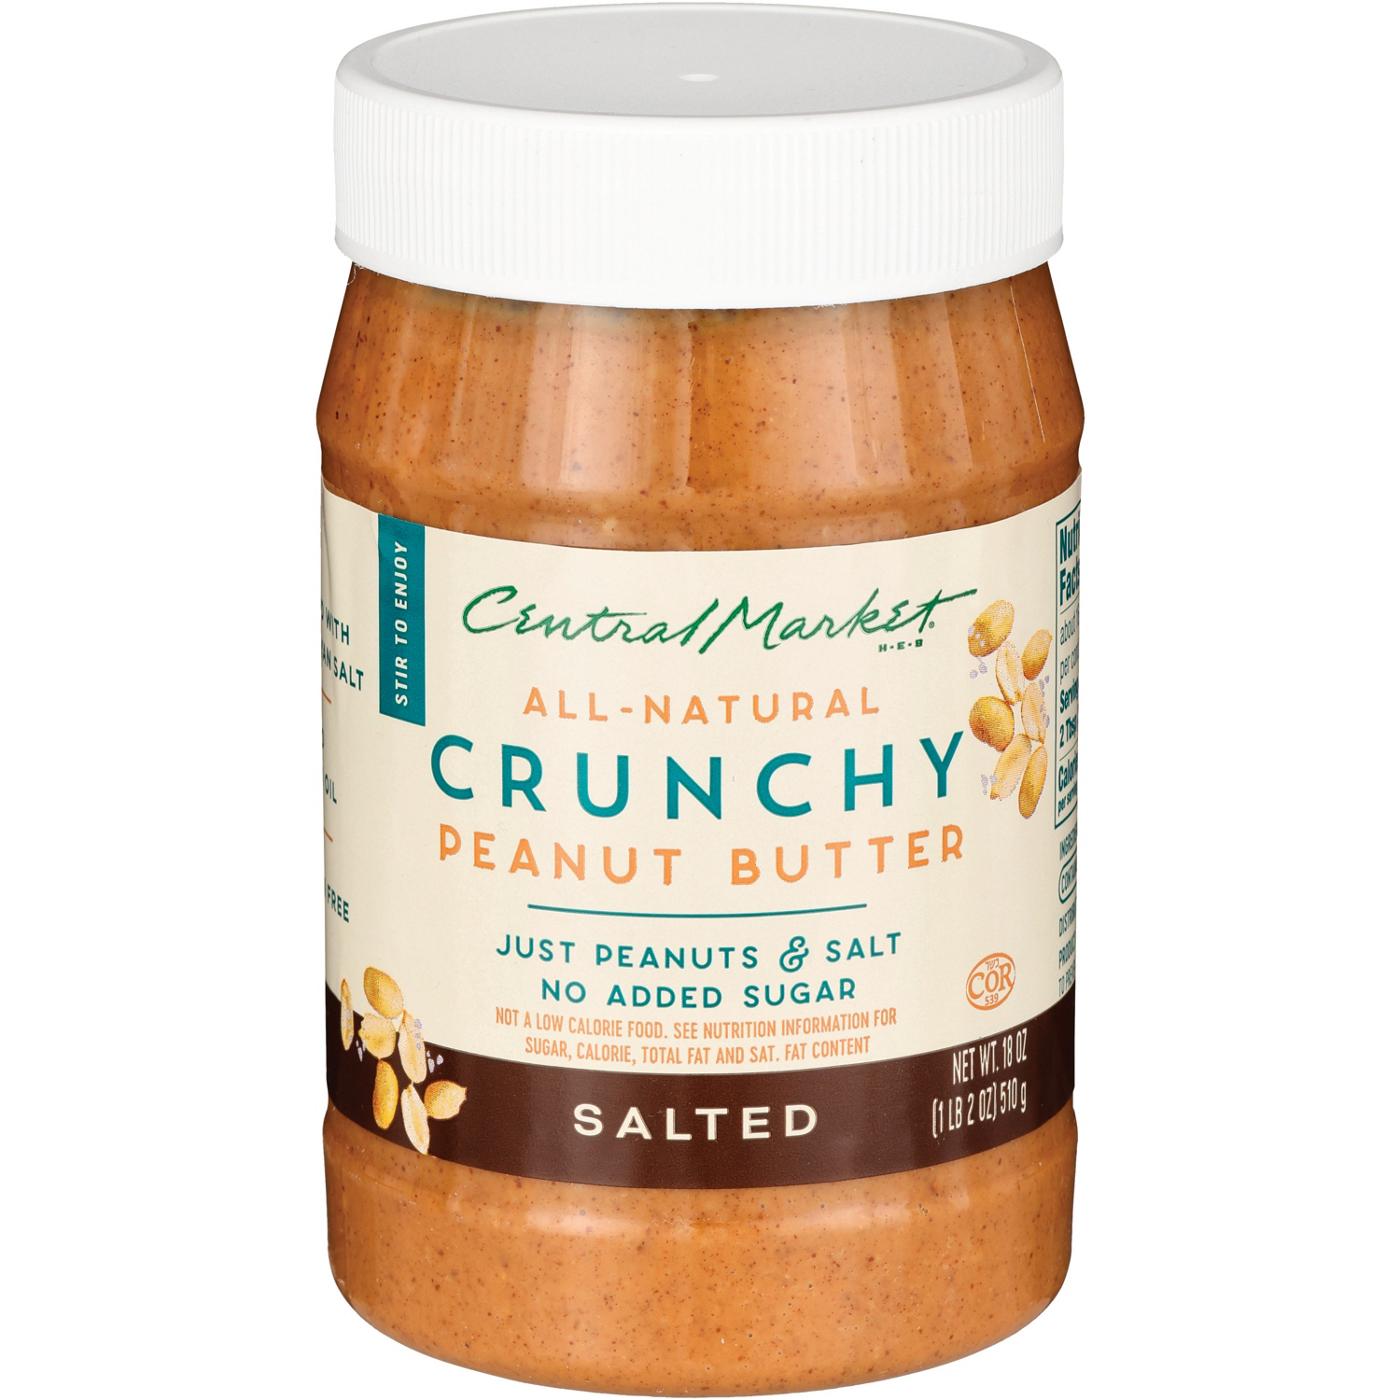 Central Market All-Natural Crunchy Peanut Butter – Salted; image 2 of 2